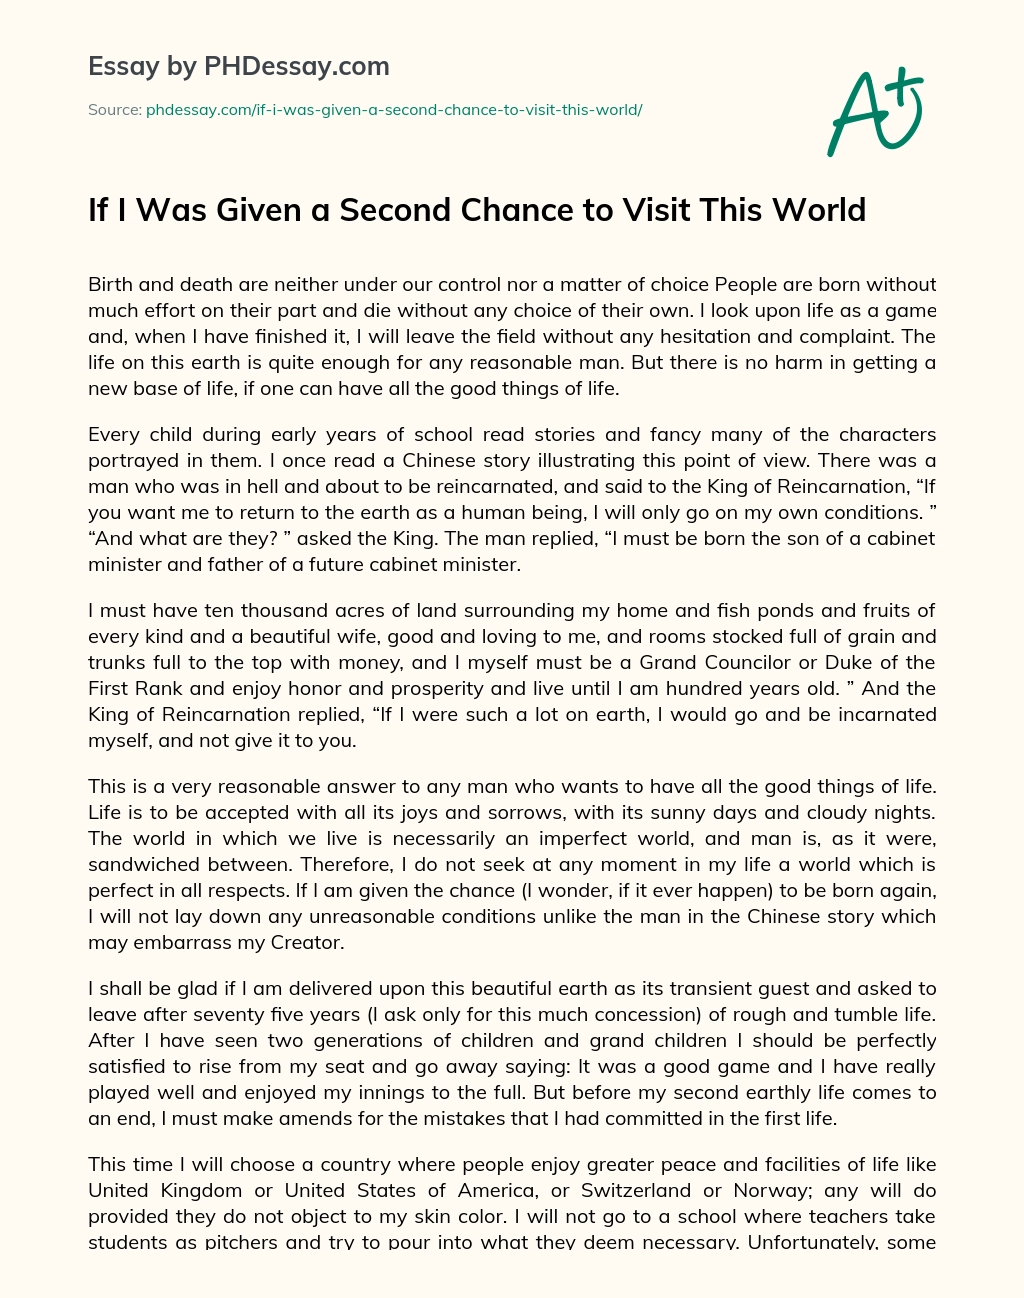 If I Was Given a Second Chance to Visit This World essay